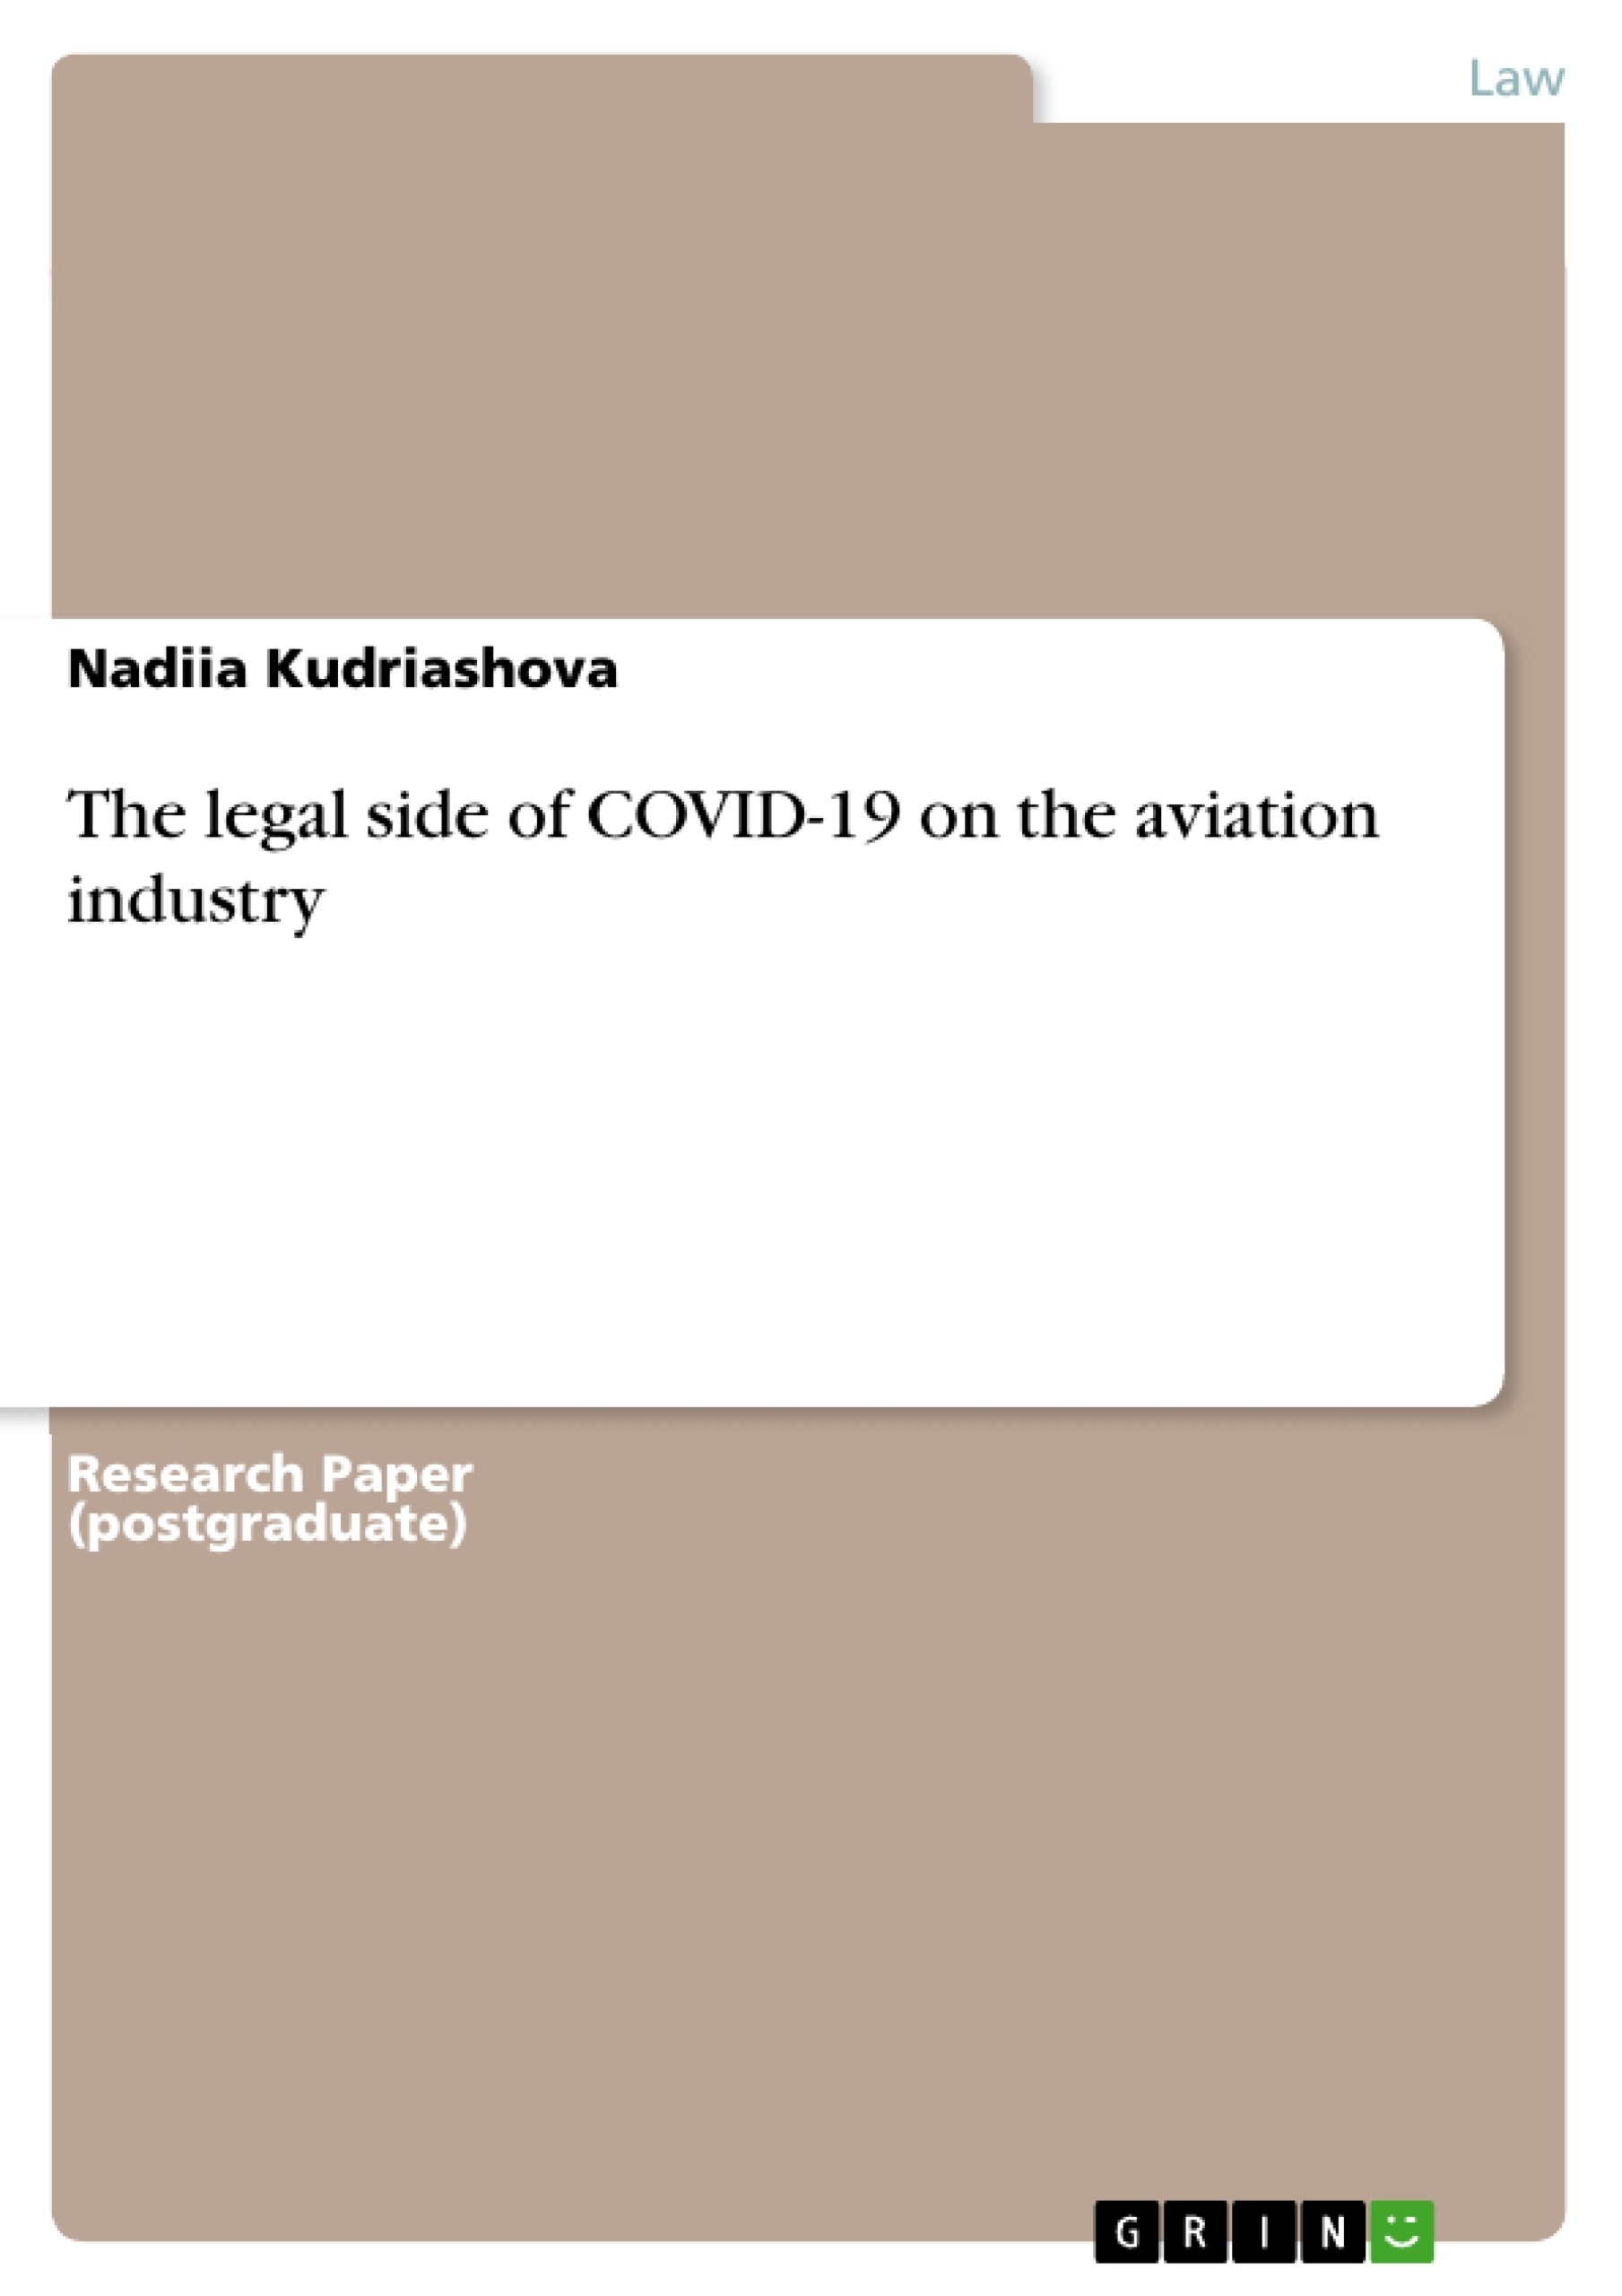 Title: The legal side of COVID-19 on the aviation industry